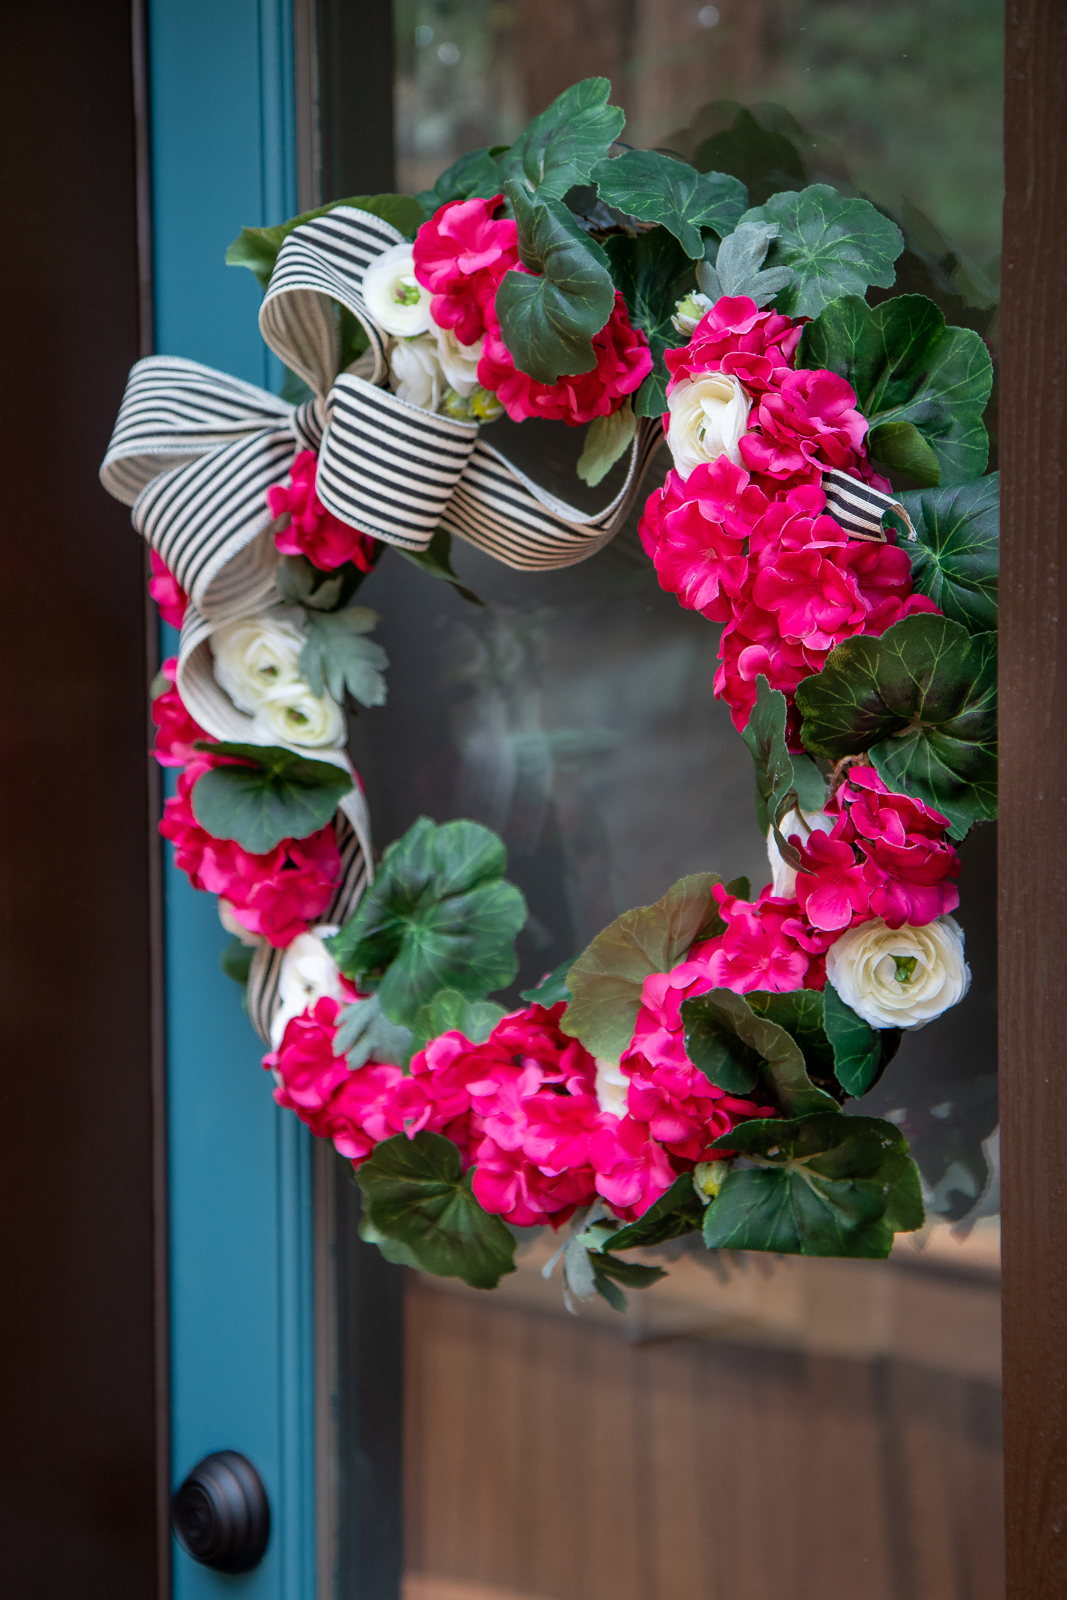 How to make a budget floral wreath